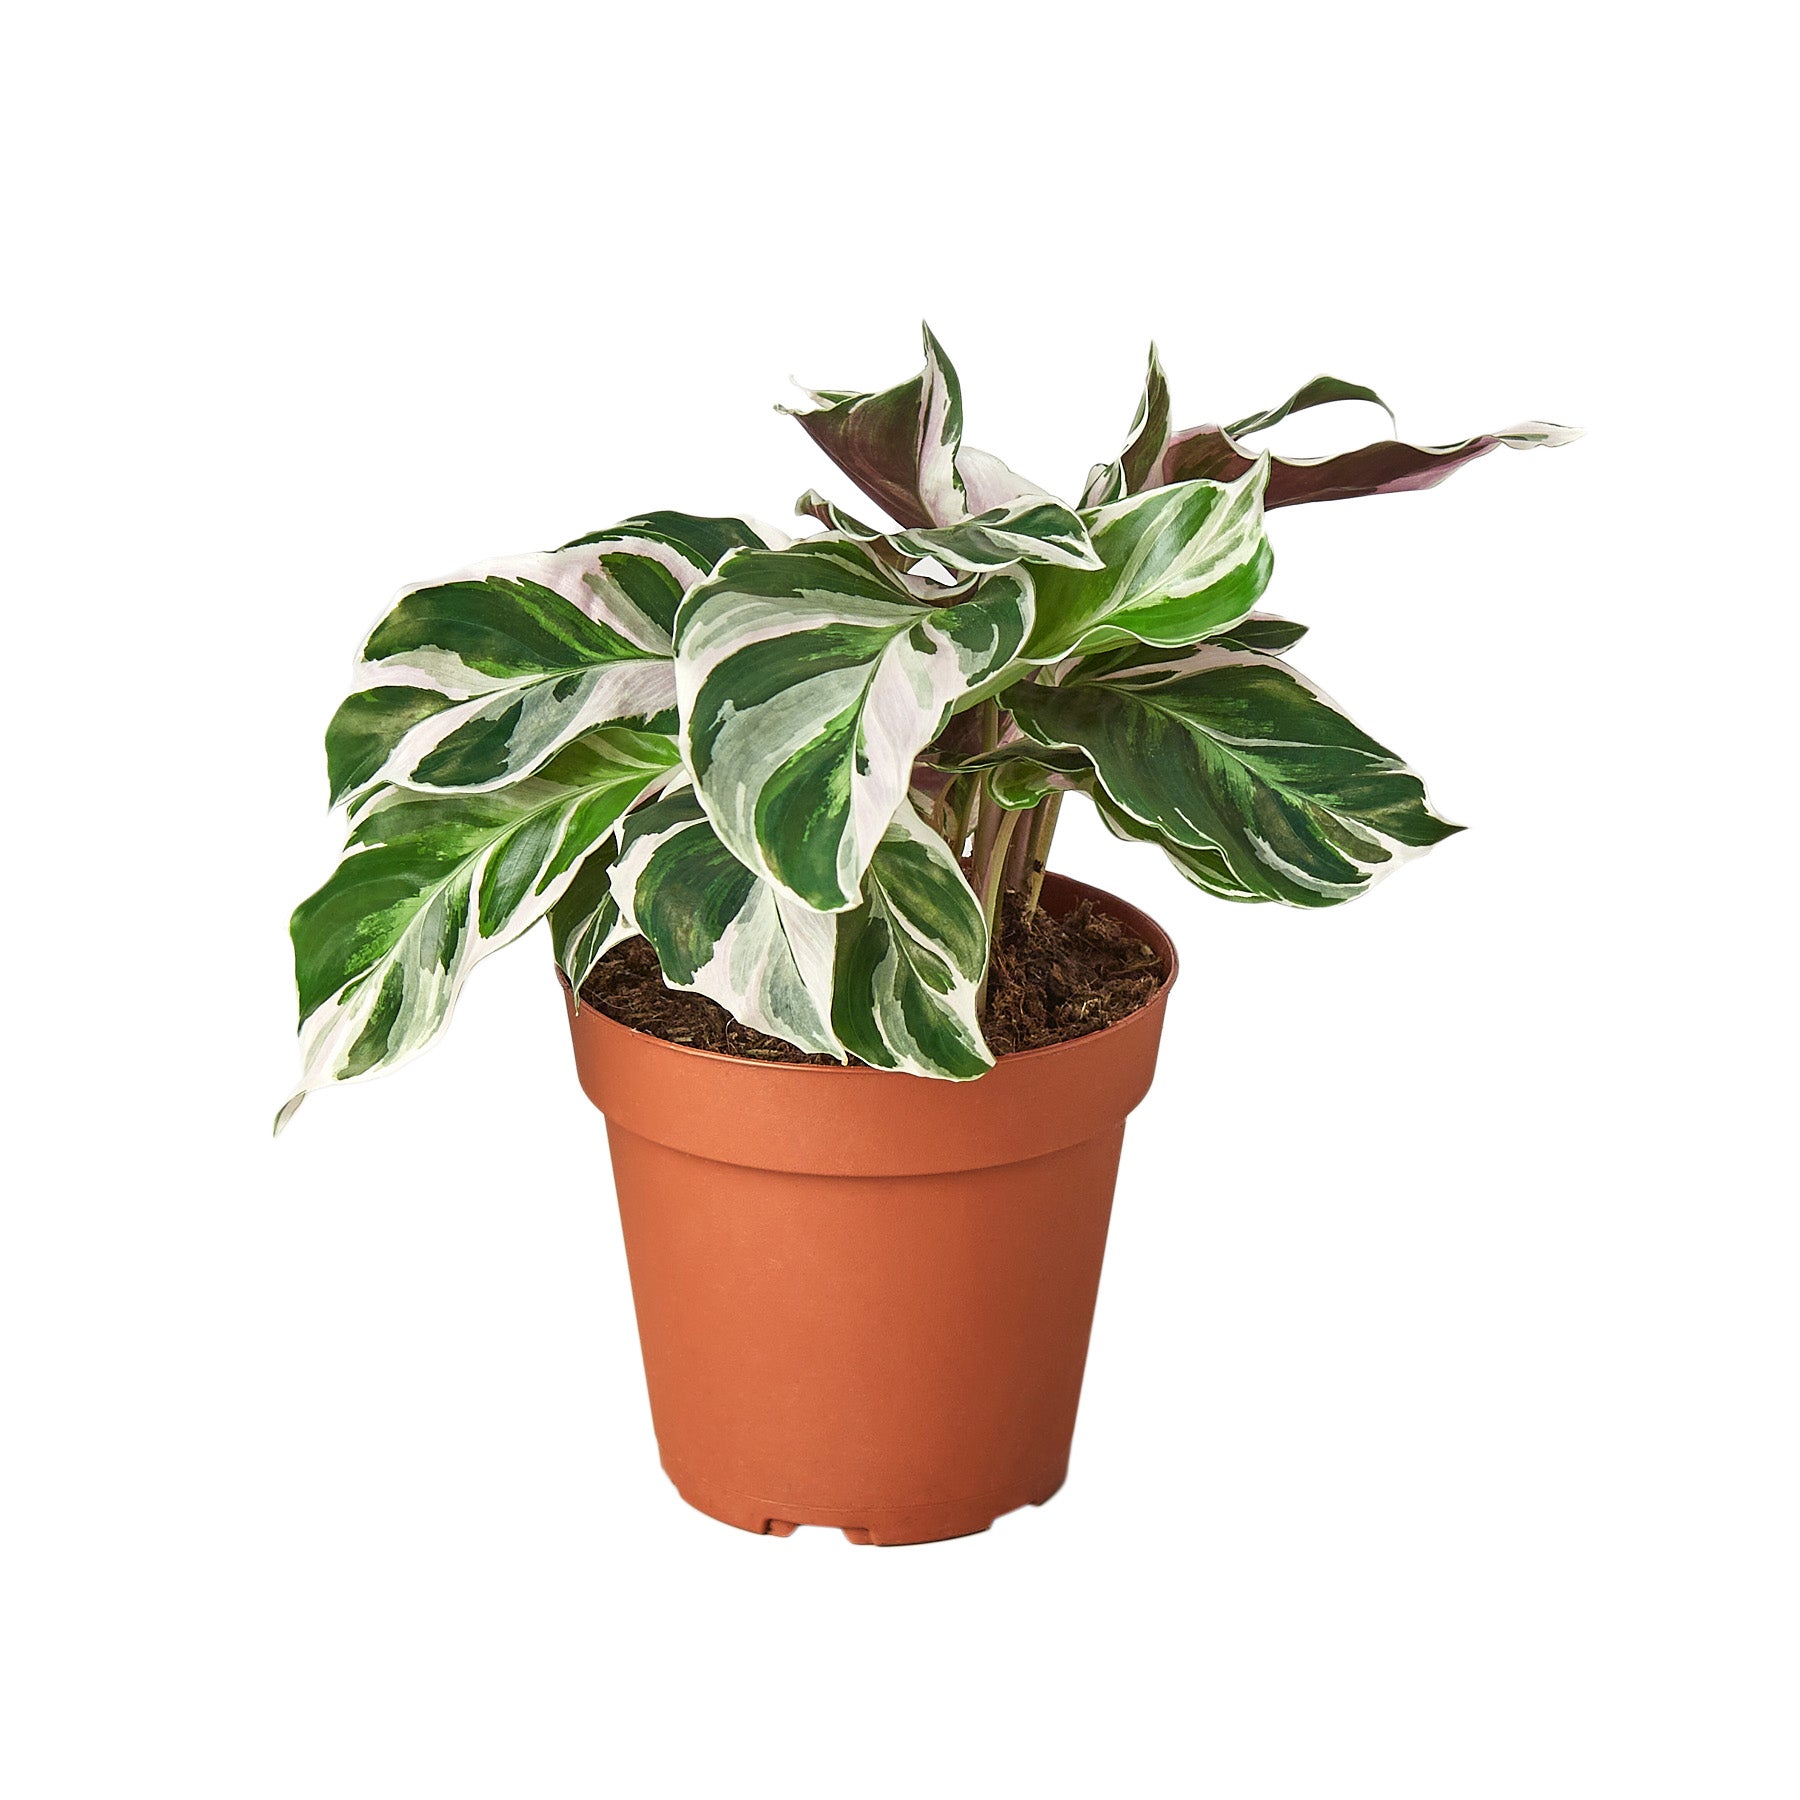 what type of soil should i use for calathea white fusion